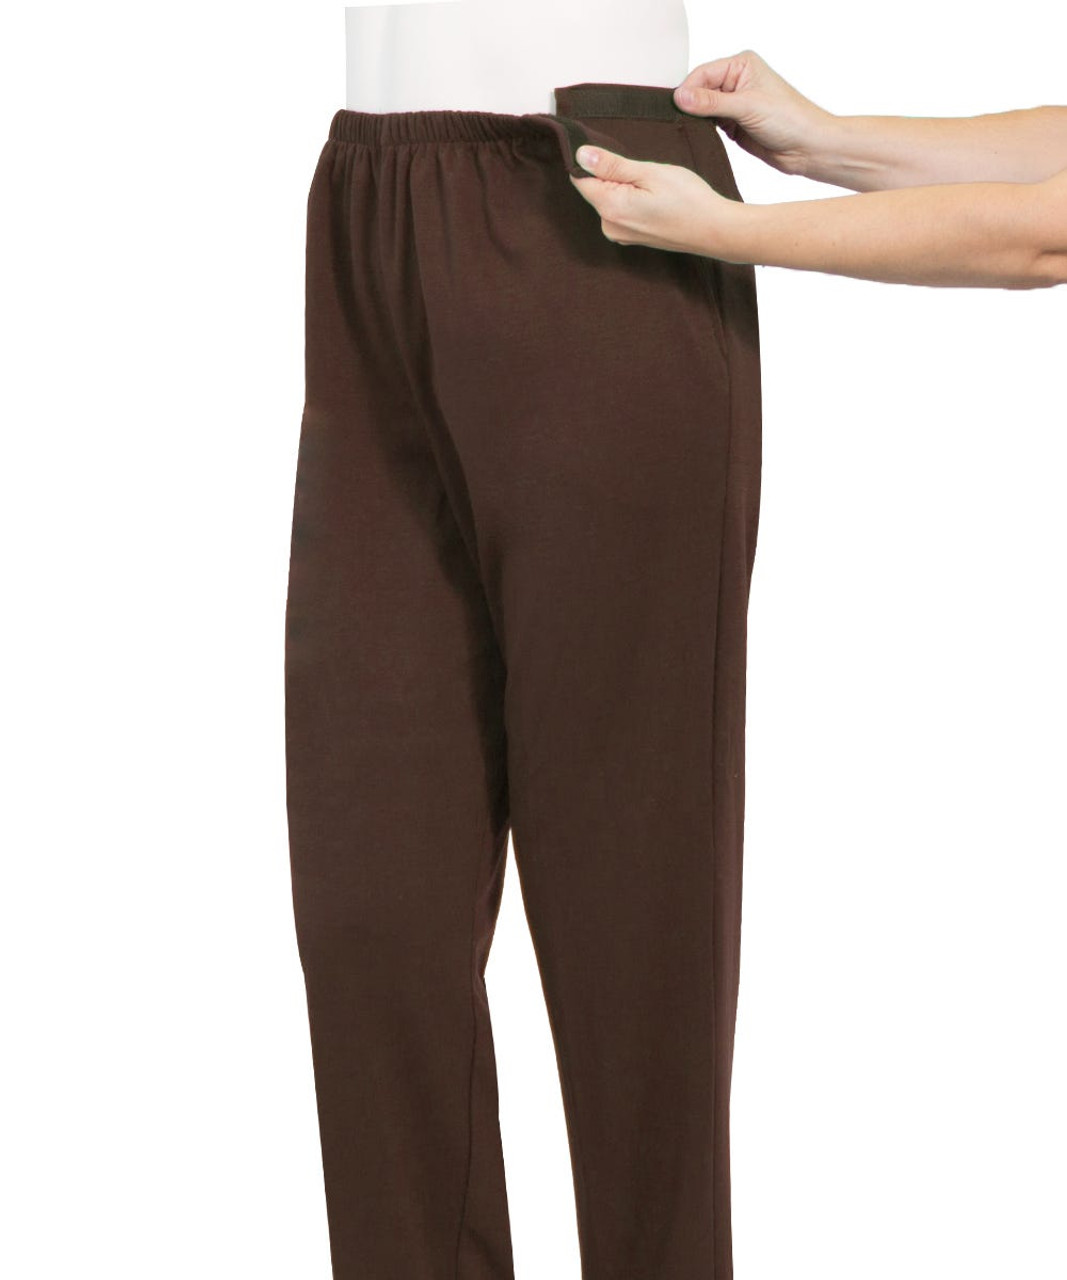 Silverts SV50660 Men's Easy Access Pants with Elastic Waist Brown, Size=3XL, SV50660-SV57-3XL